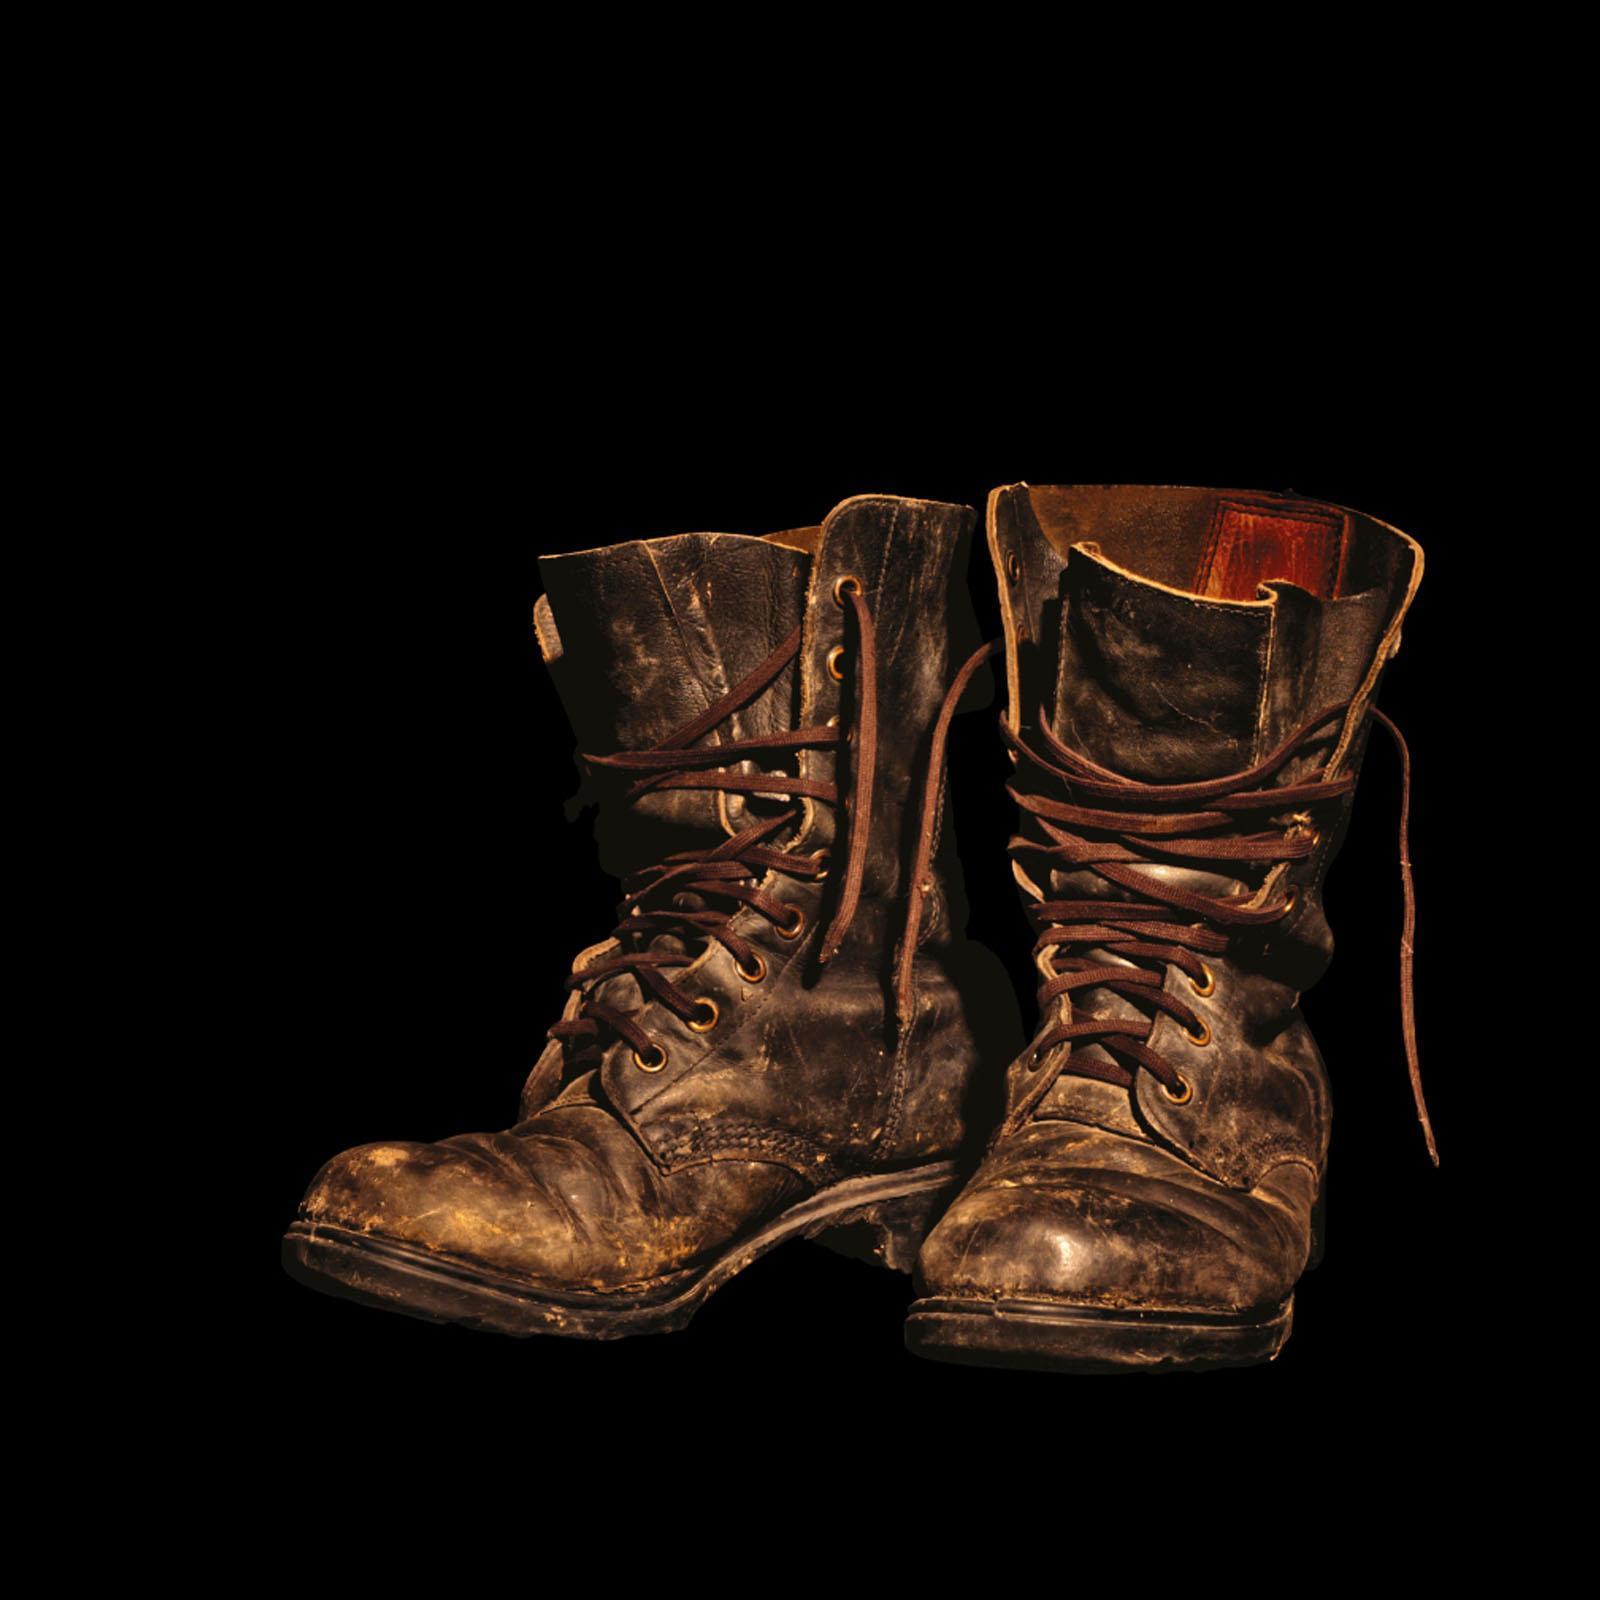 Worn brown boots against a black background